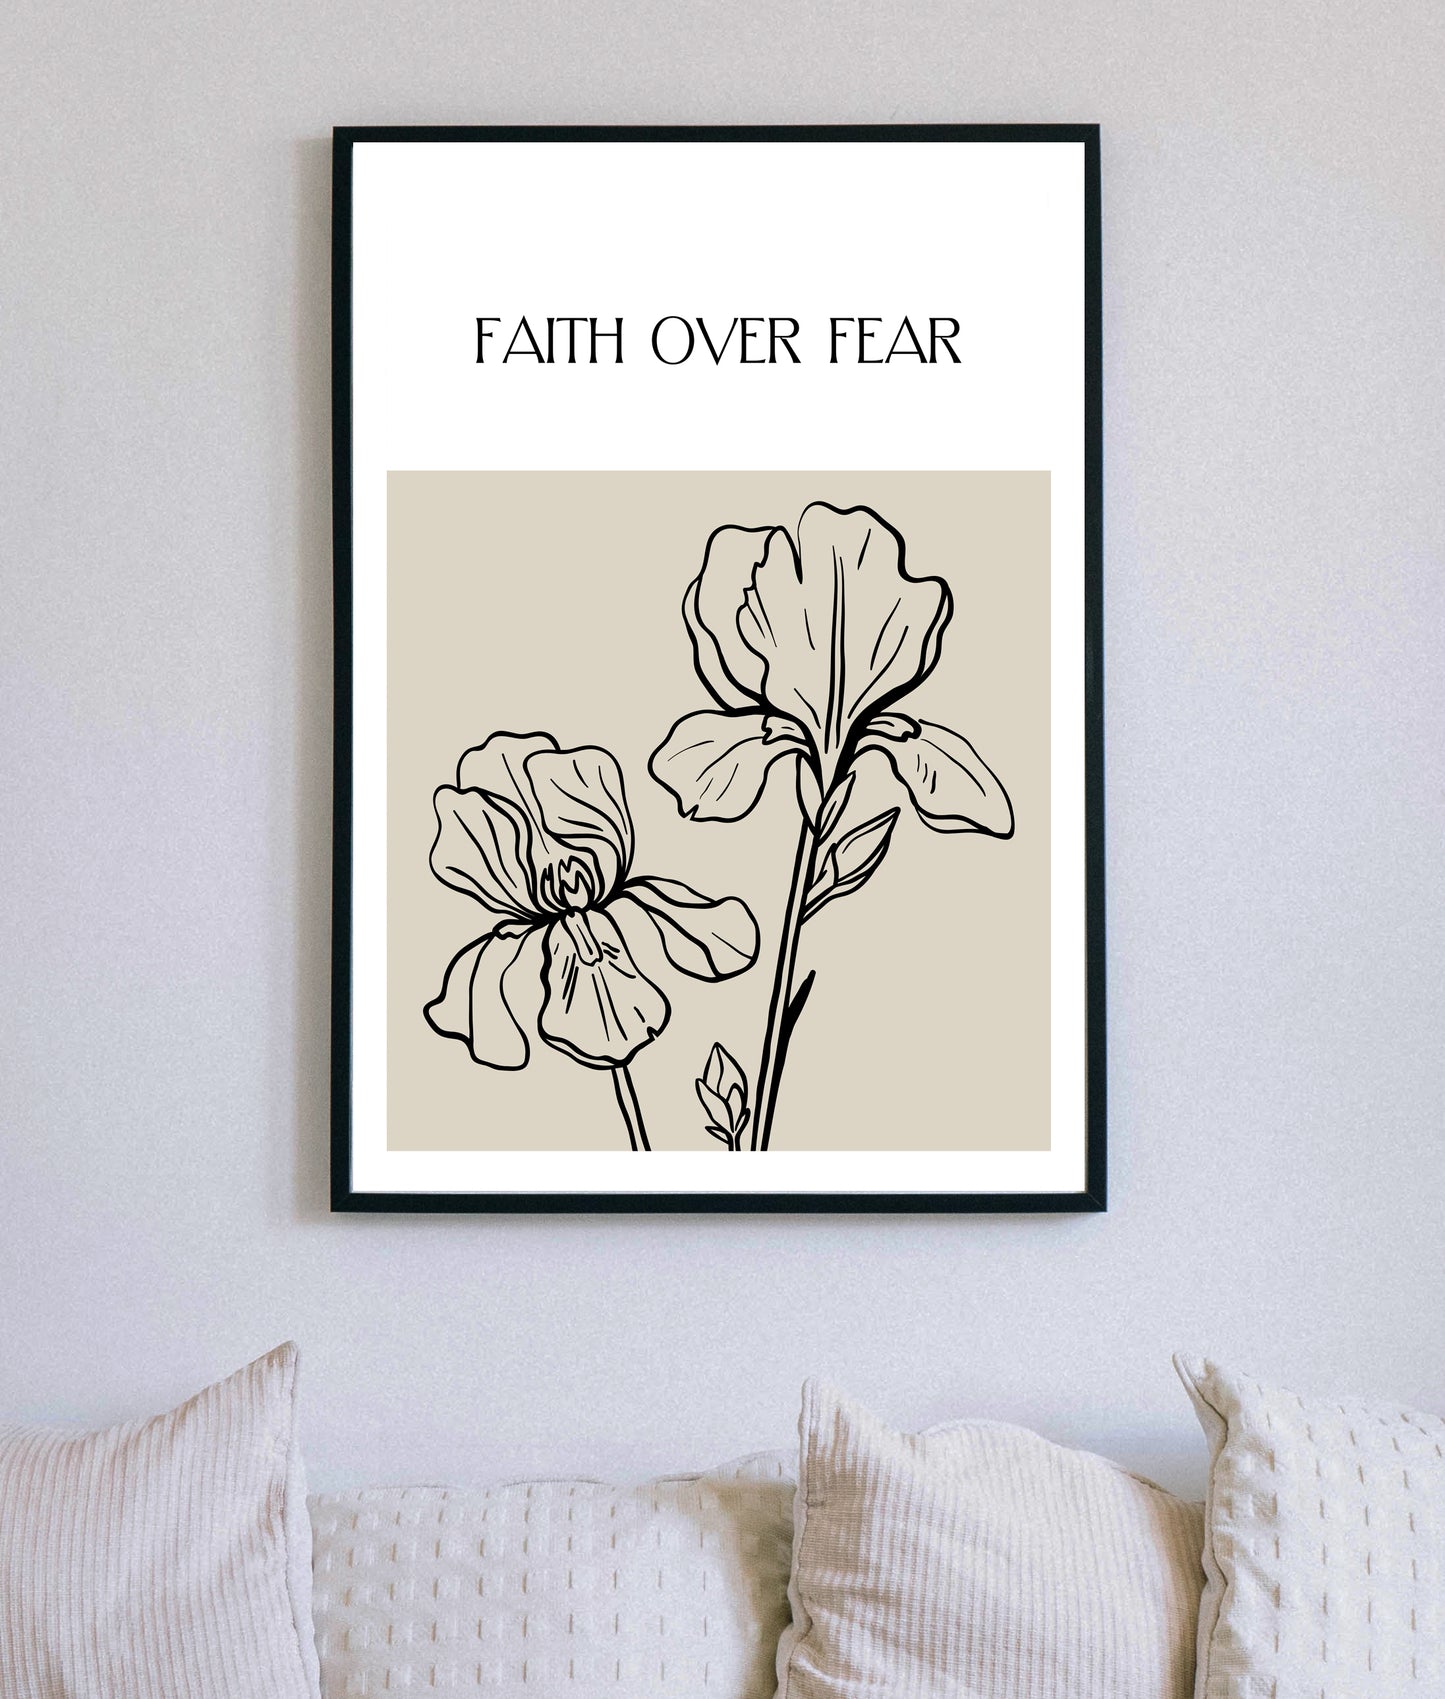 Faith Over Fear Christian Quote, Scripture, Bible Verse Poster Wall Art